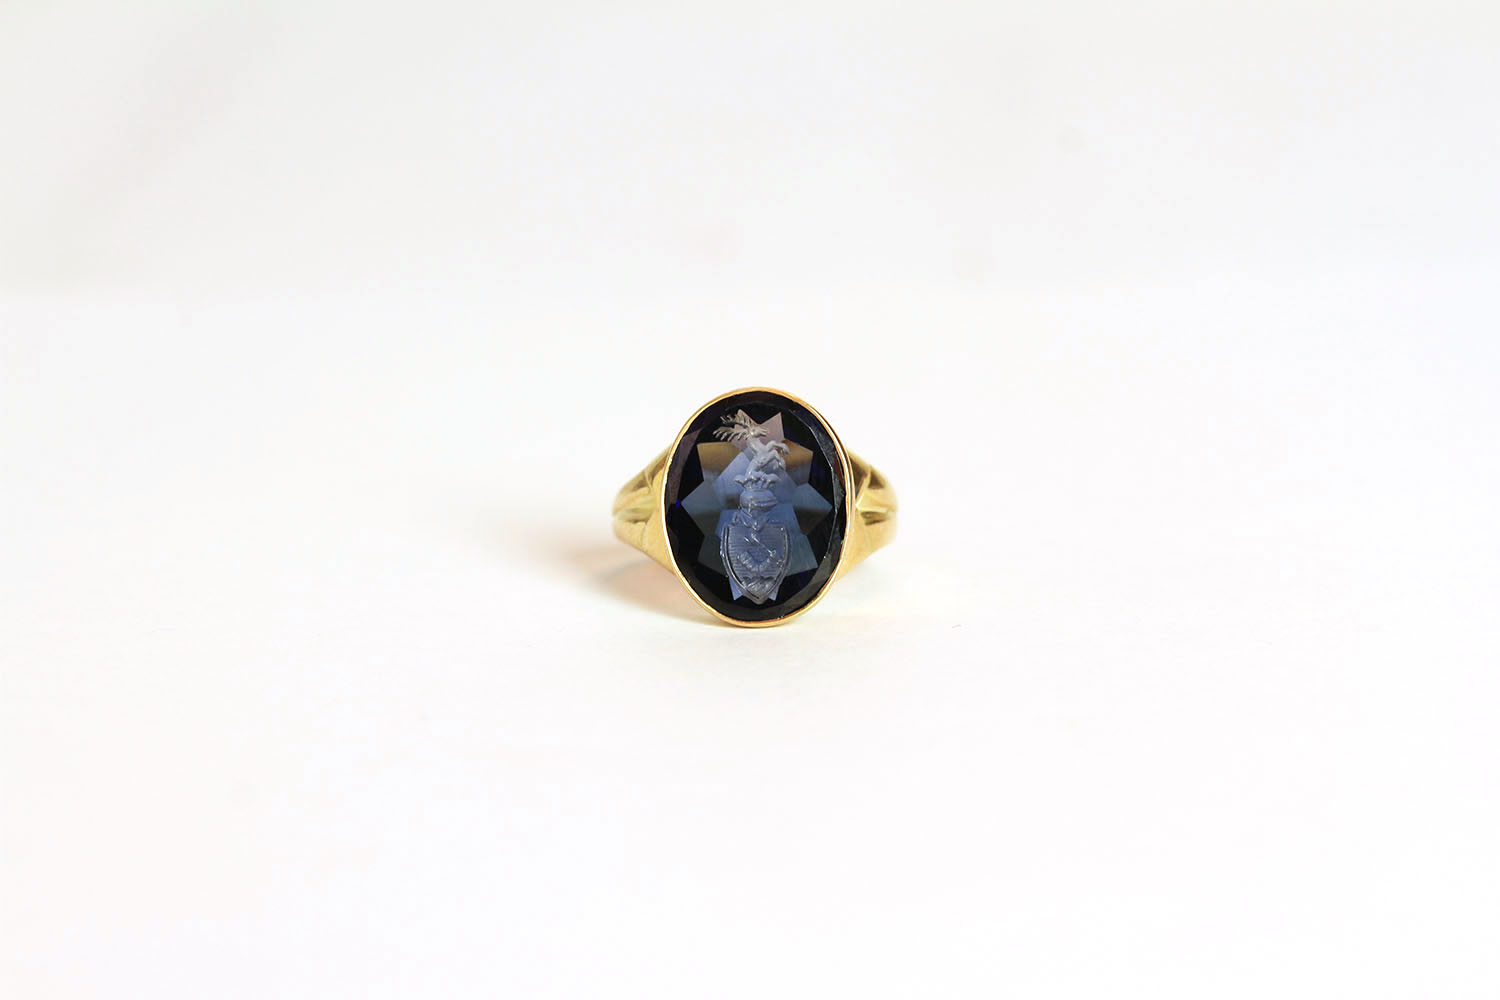 Engraved Blue Sapphire ring, coat of arms engraved to the front, finger size M.